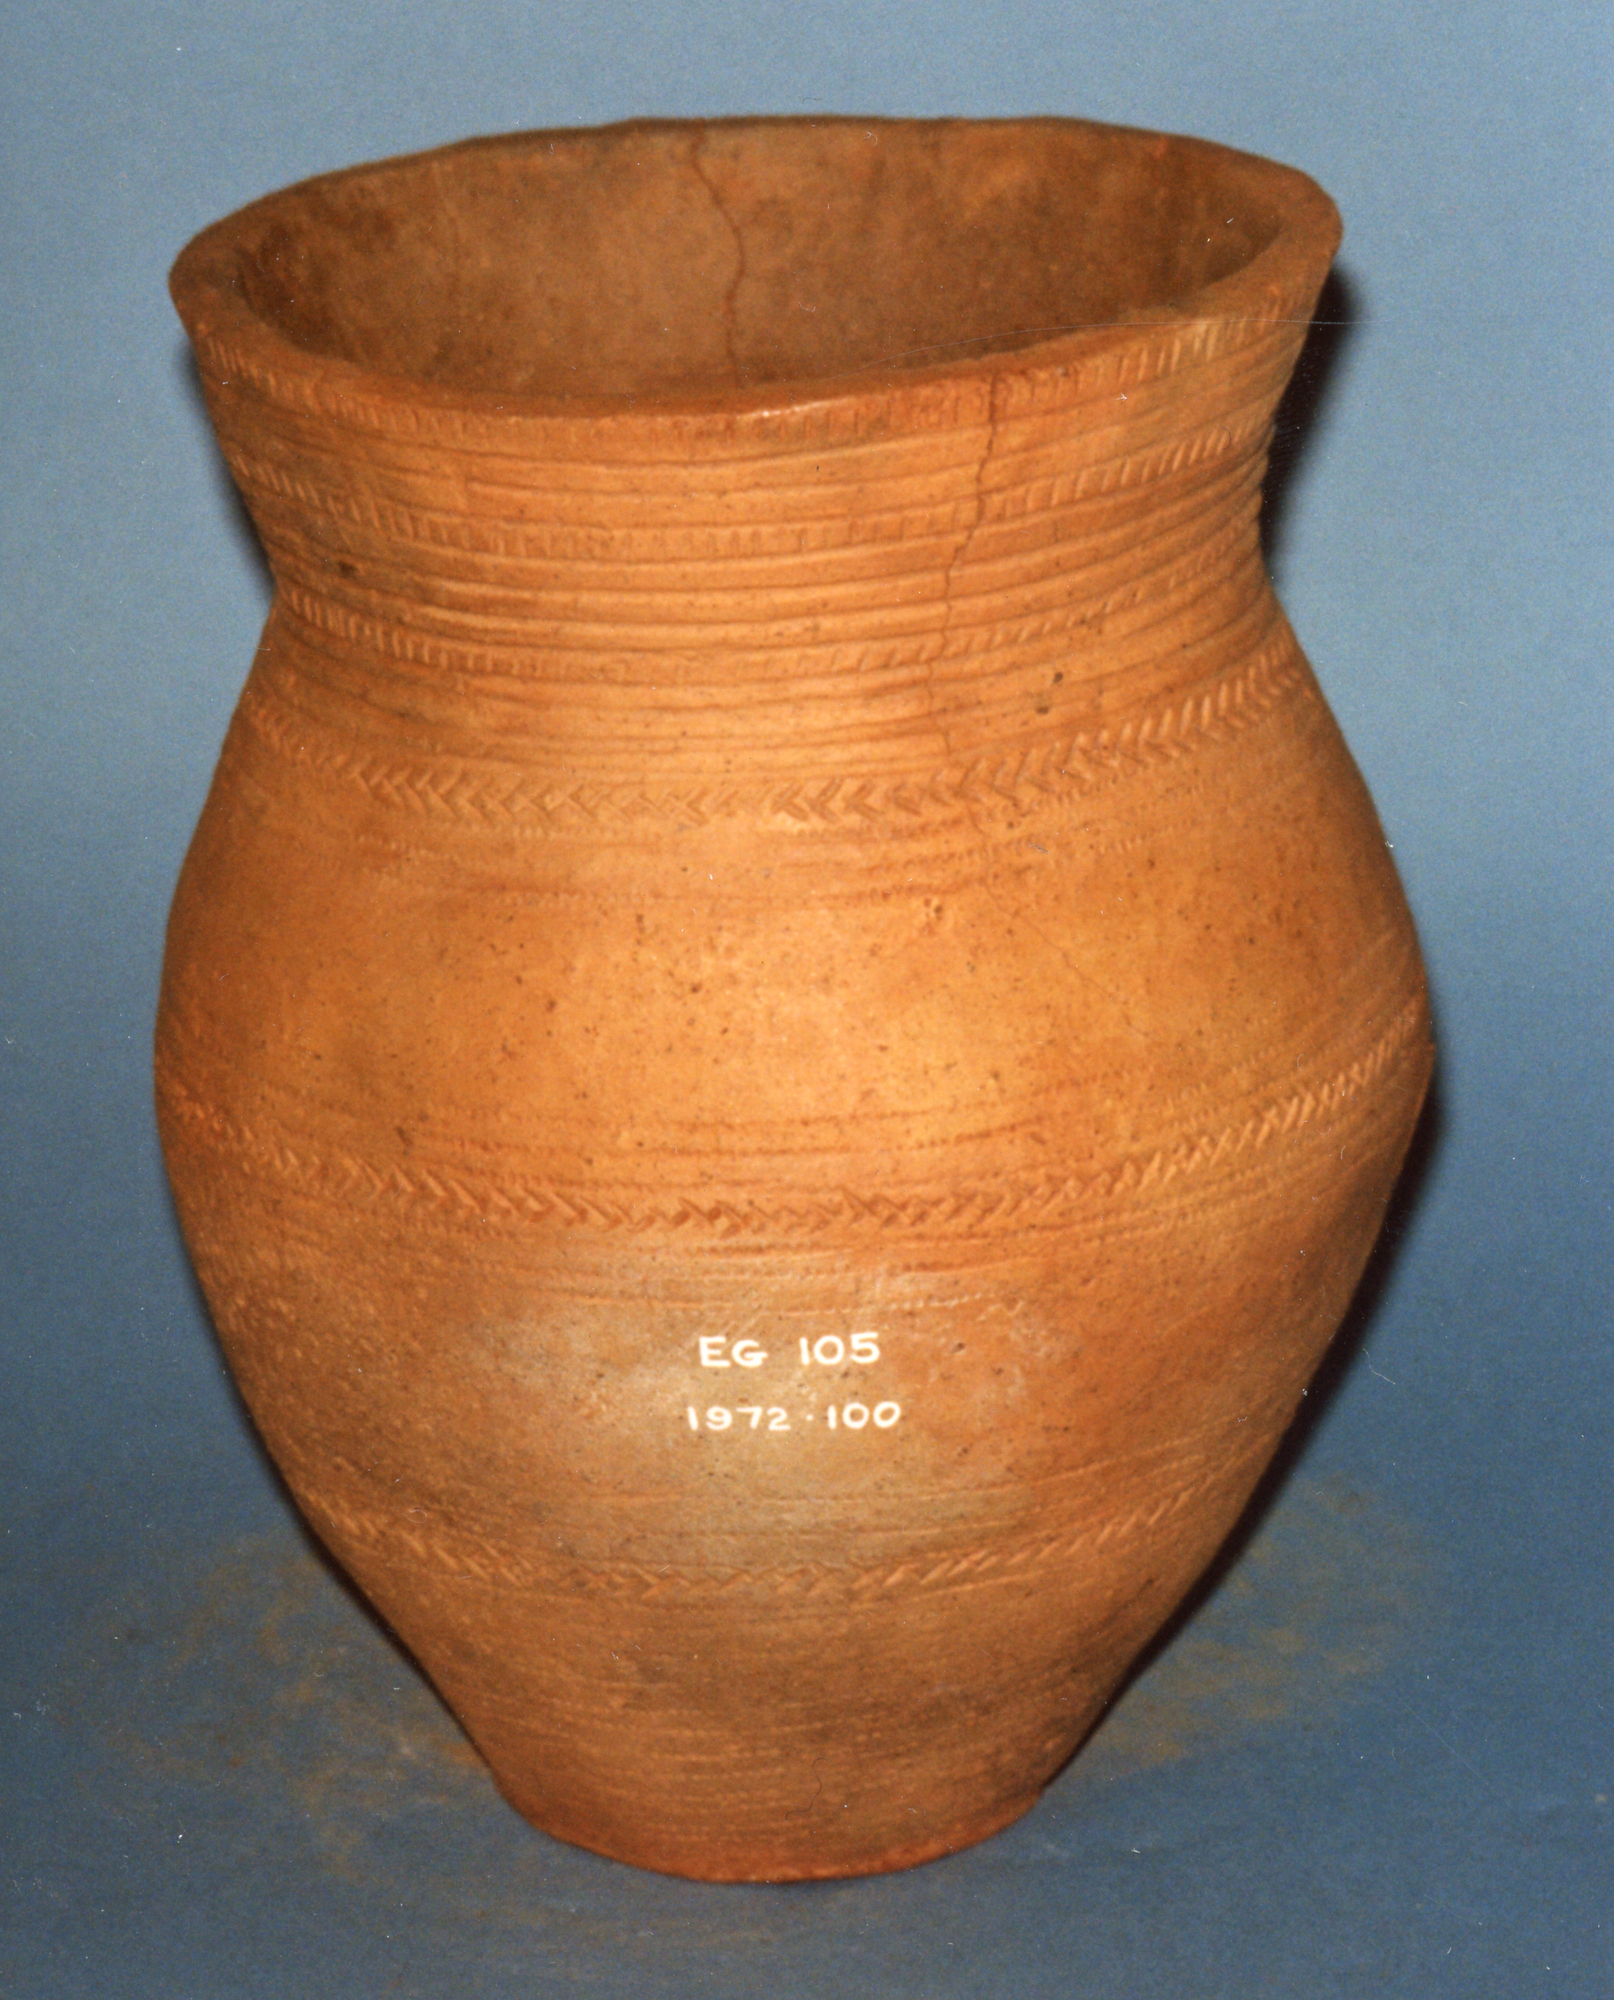 Image of Beaker of red buff ware with decoration in three zones and a hulled barley impression, from Skateraw, Chalcolithic or Early Bronze Age, 2300 - 2000 BC © National Museums Scotland